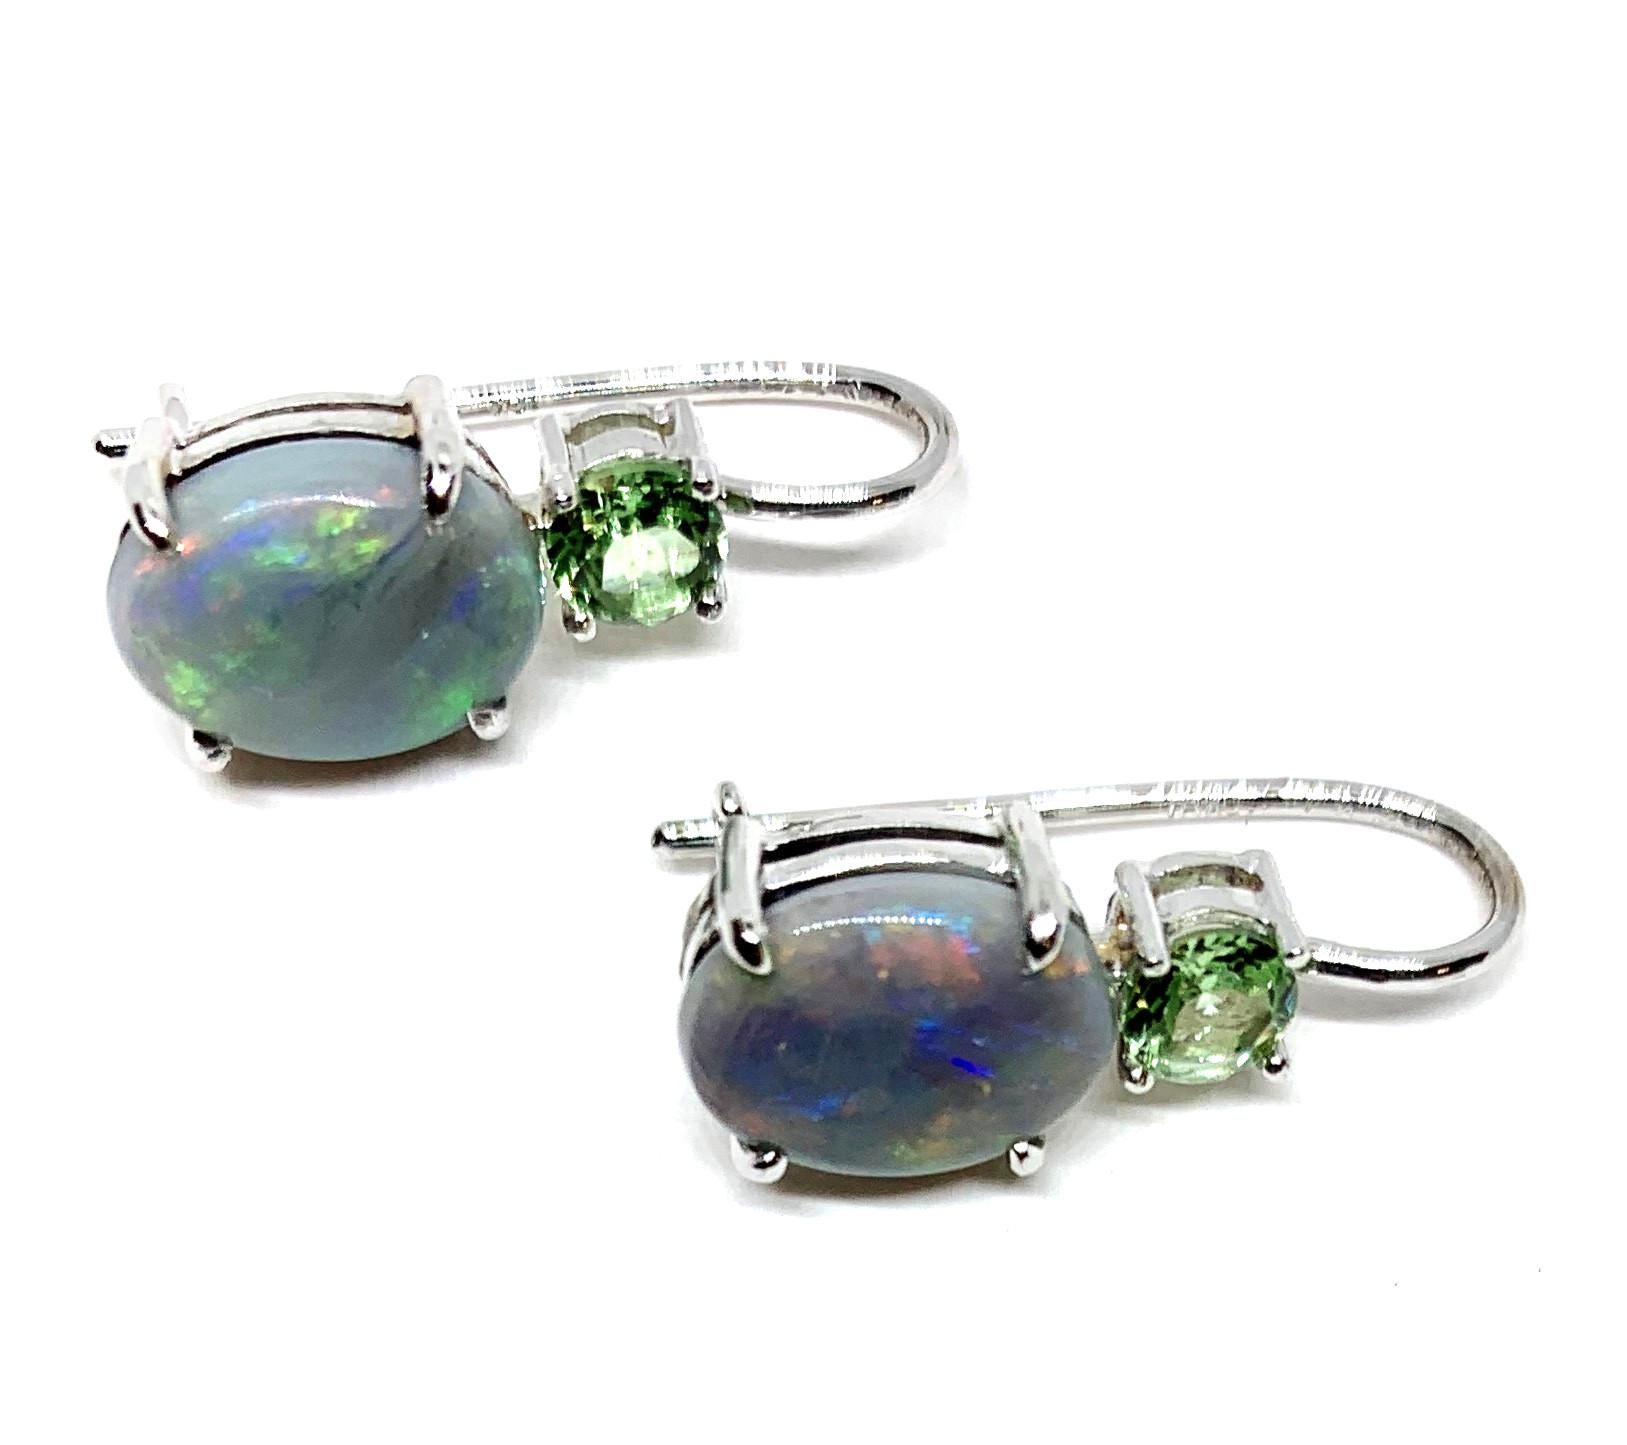 The color pairing of semi-black opals with pastel green overtones and pastel tsavorite garnets of the same color of green is both subtle and beautiful. They are cool color tones that we have set in 18k white gold handmade lever-back earrings. Oval